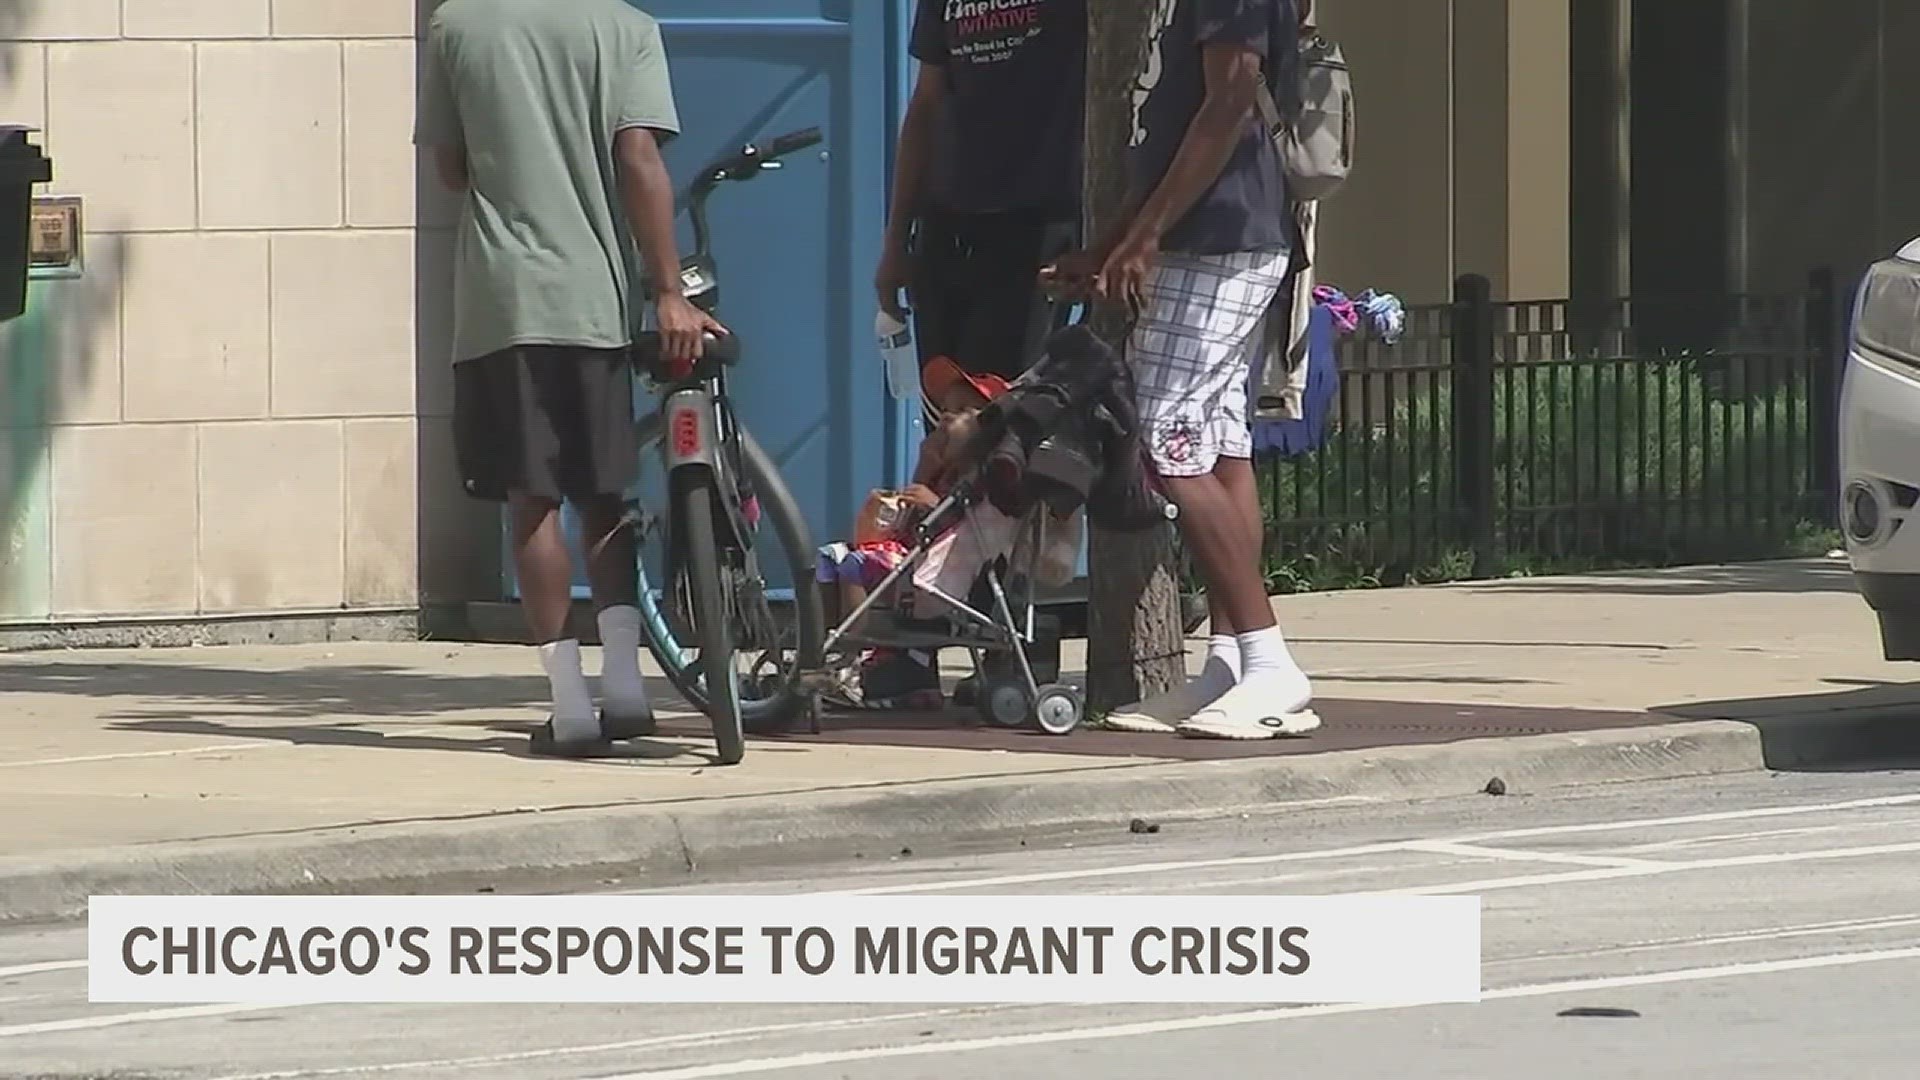 For some migrants the wait for a shelter is so long they've resorted to sleeping on the streets. This comes as almost 1,000 migrants are displaced in Chicago.